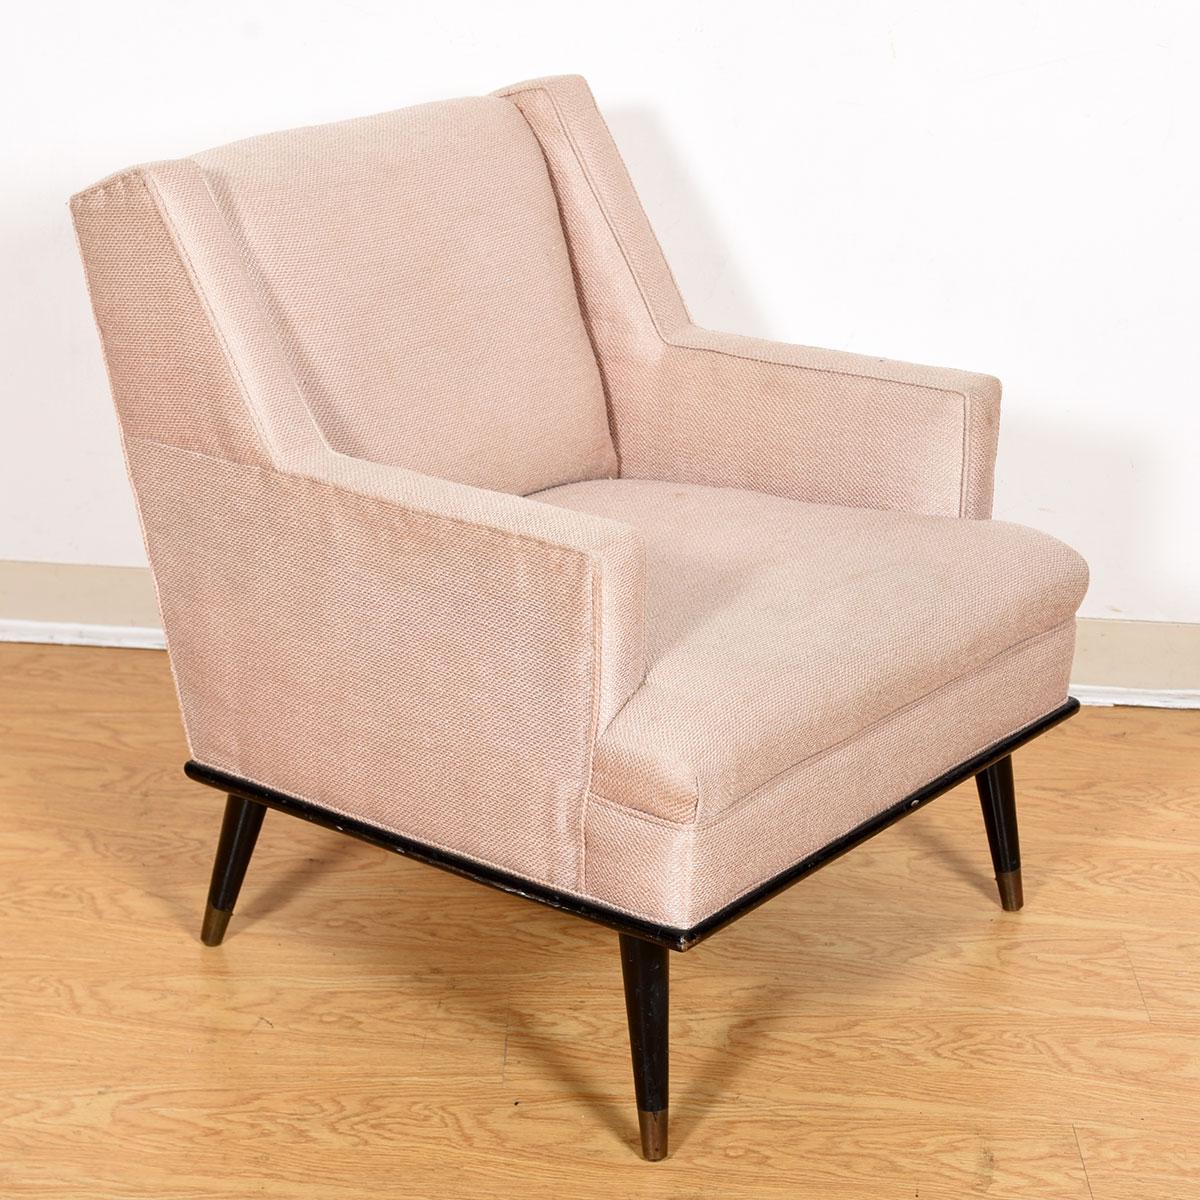 Upholstery Mid-Century Modern Upholstered Club Chair by Milo Baughman for James, Inc For Sale